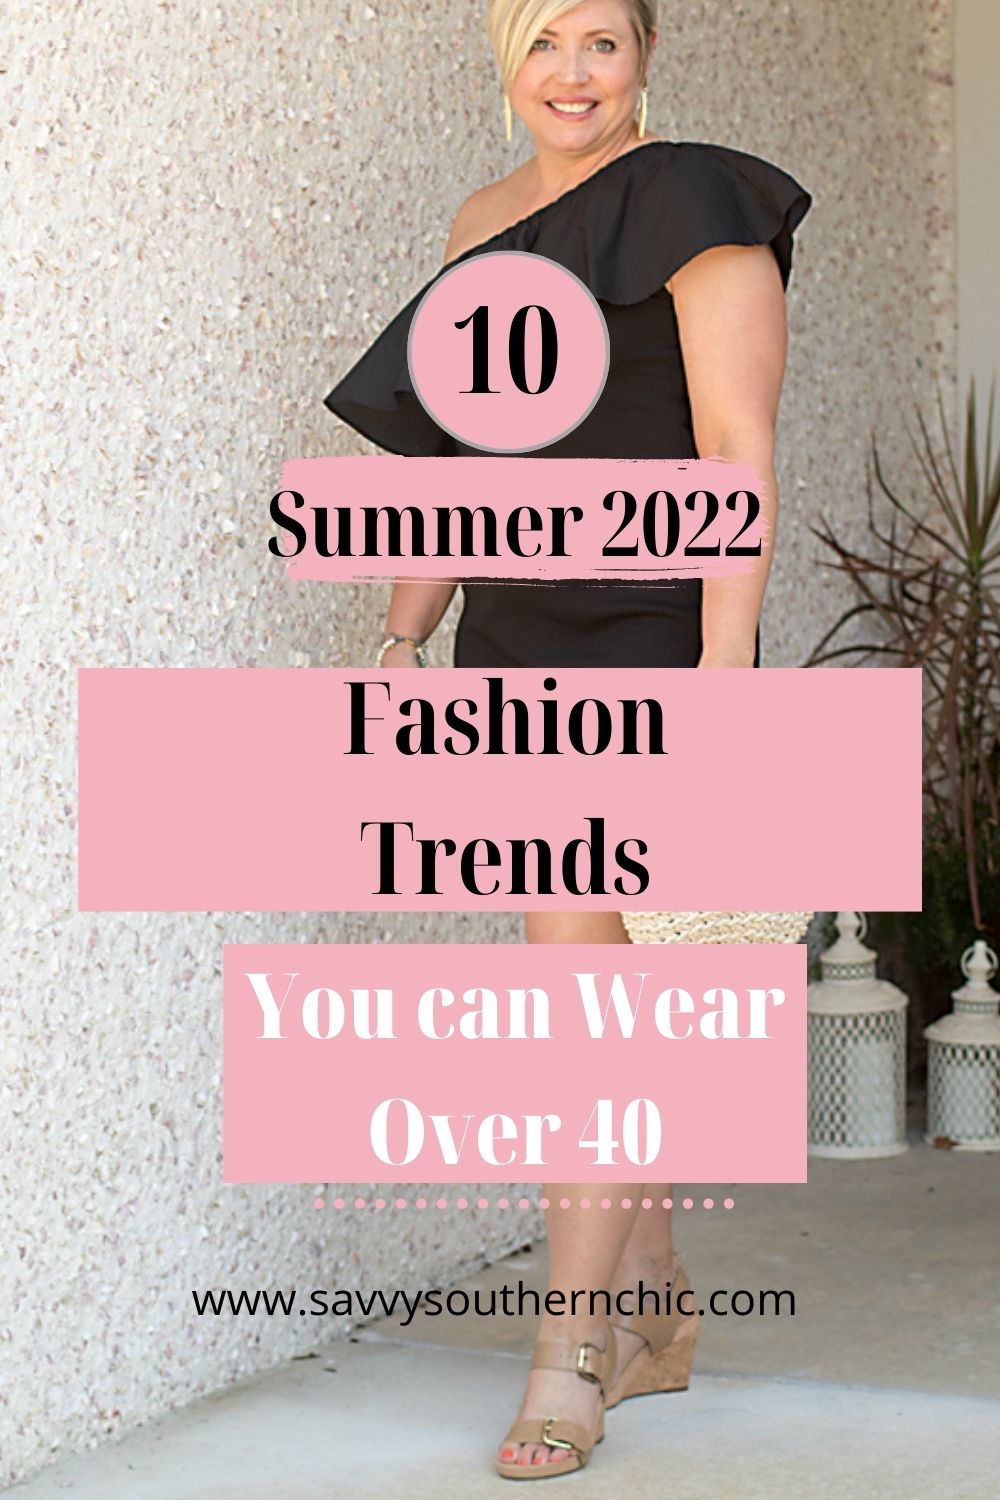 Summer 2022 Fashion Trends You Can Wear Over 40